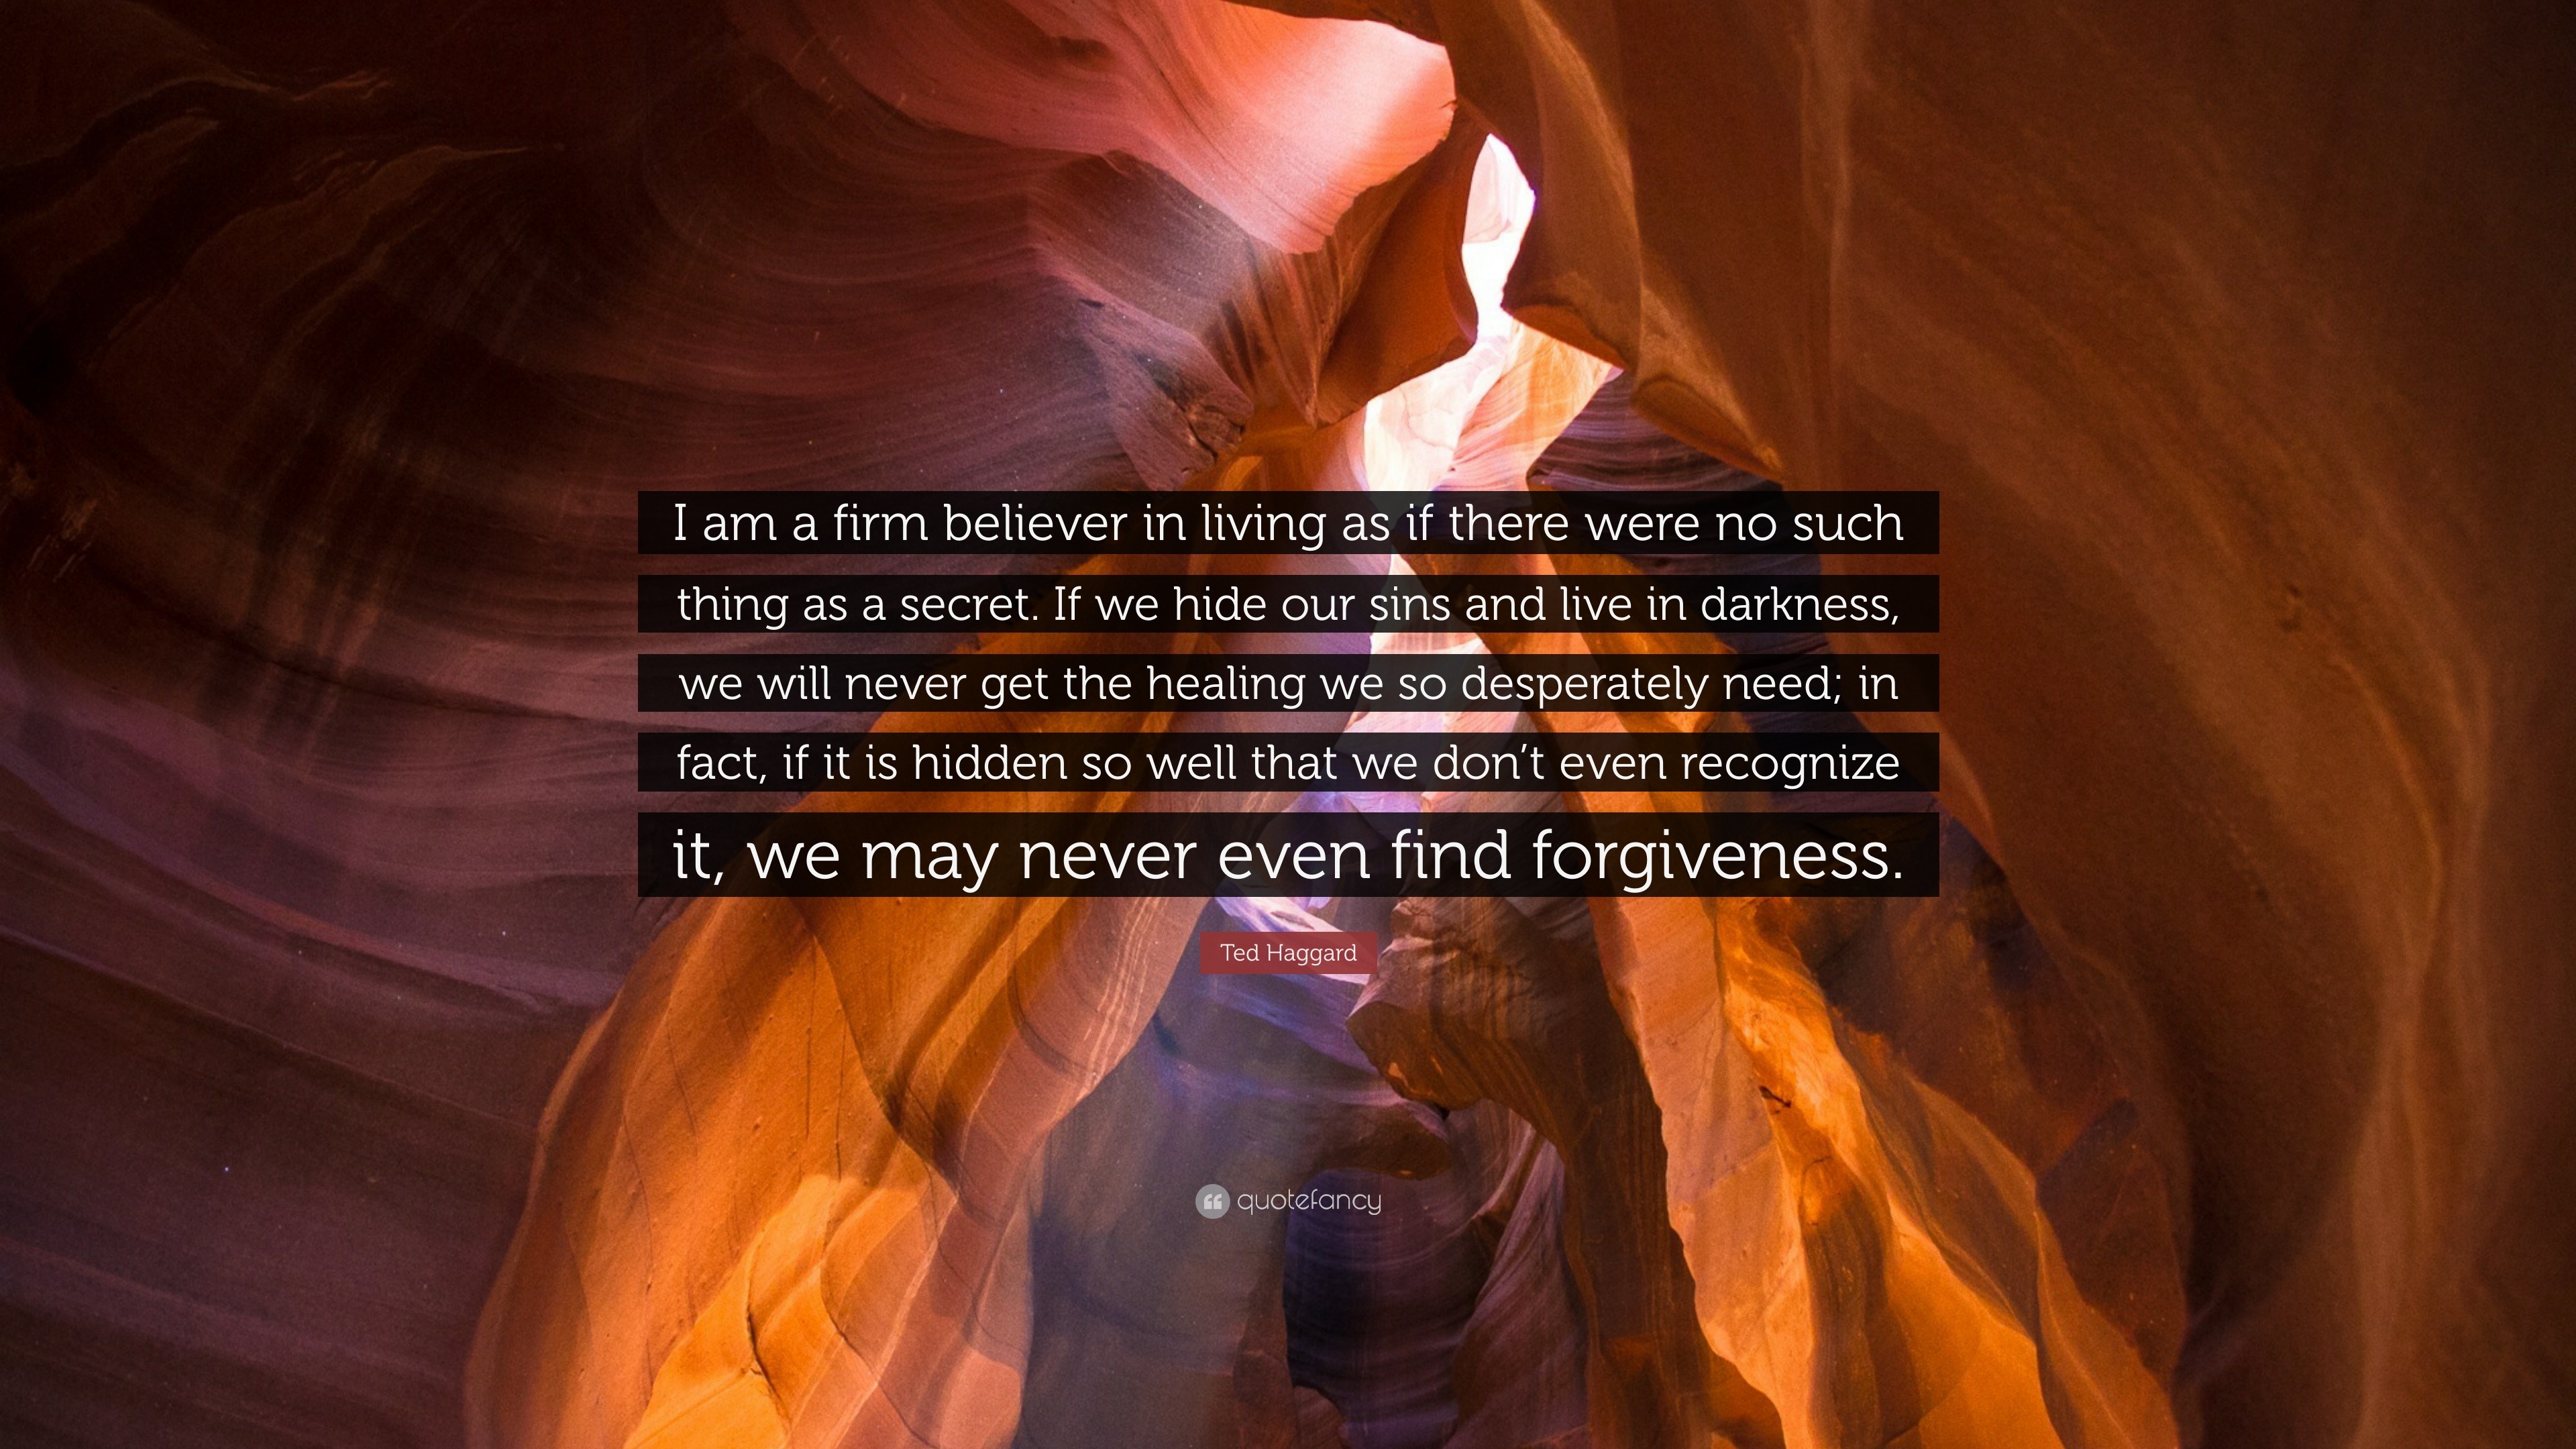 Ted Haggard quote: I am a firm believer in living as if there